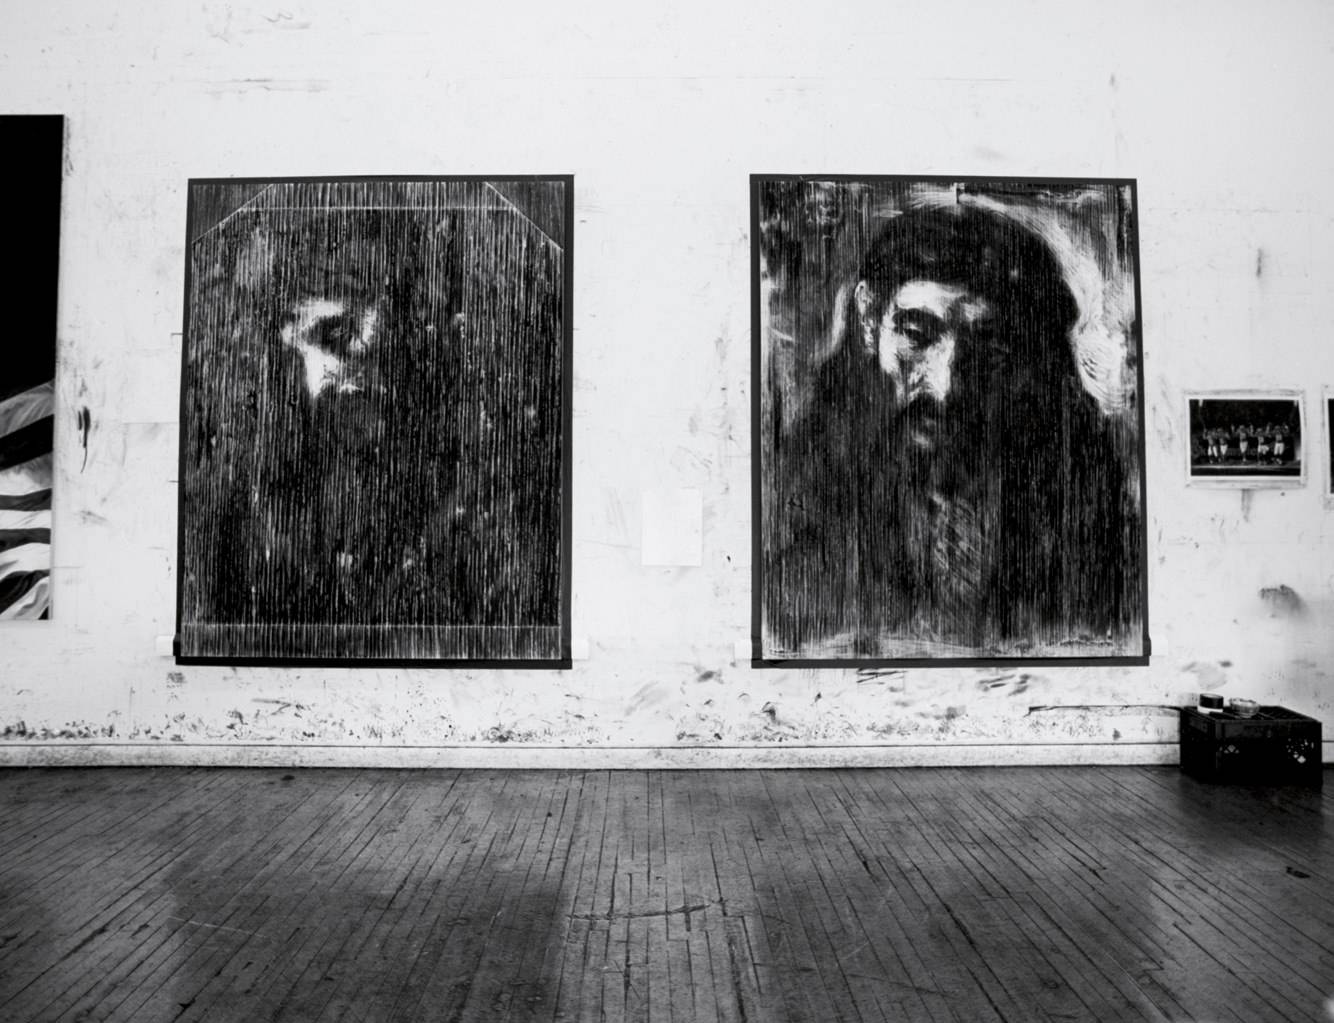 View of the studio. These Robert Longo works were made after representations of Jesus Chris drawn by Rembrandt.